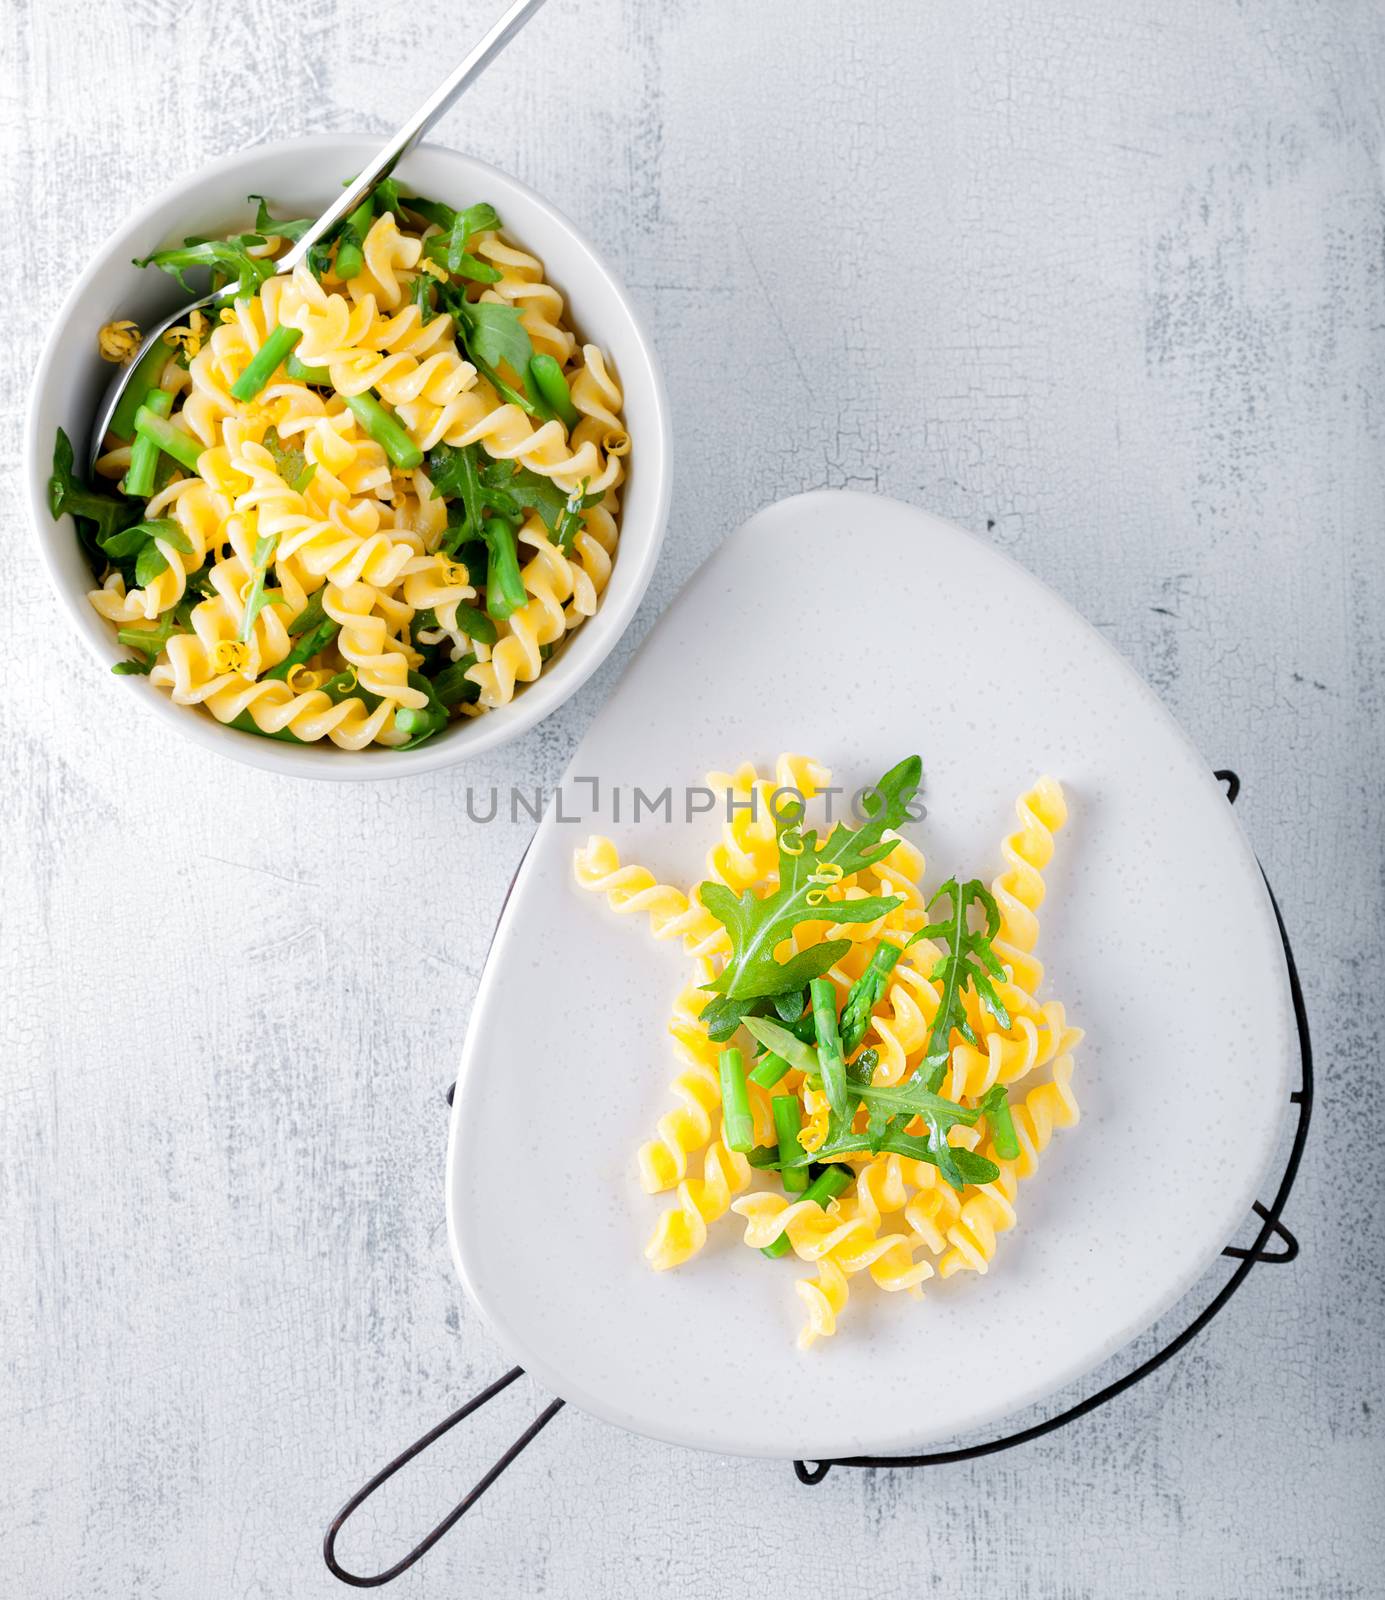 Pasta salad with asparagus and arugula by supercat67